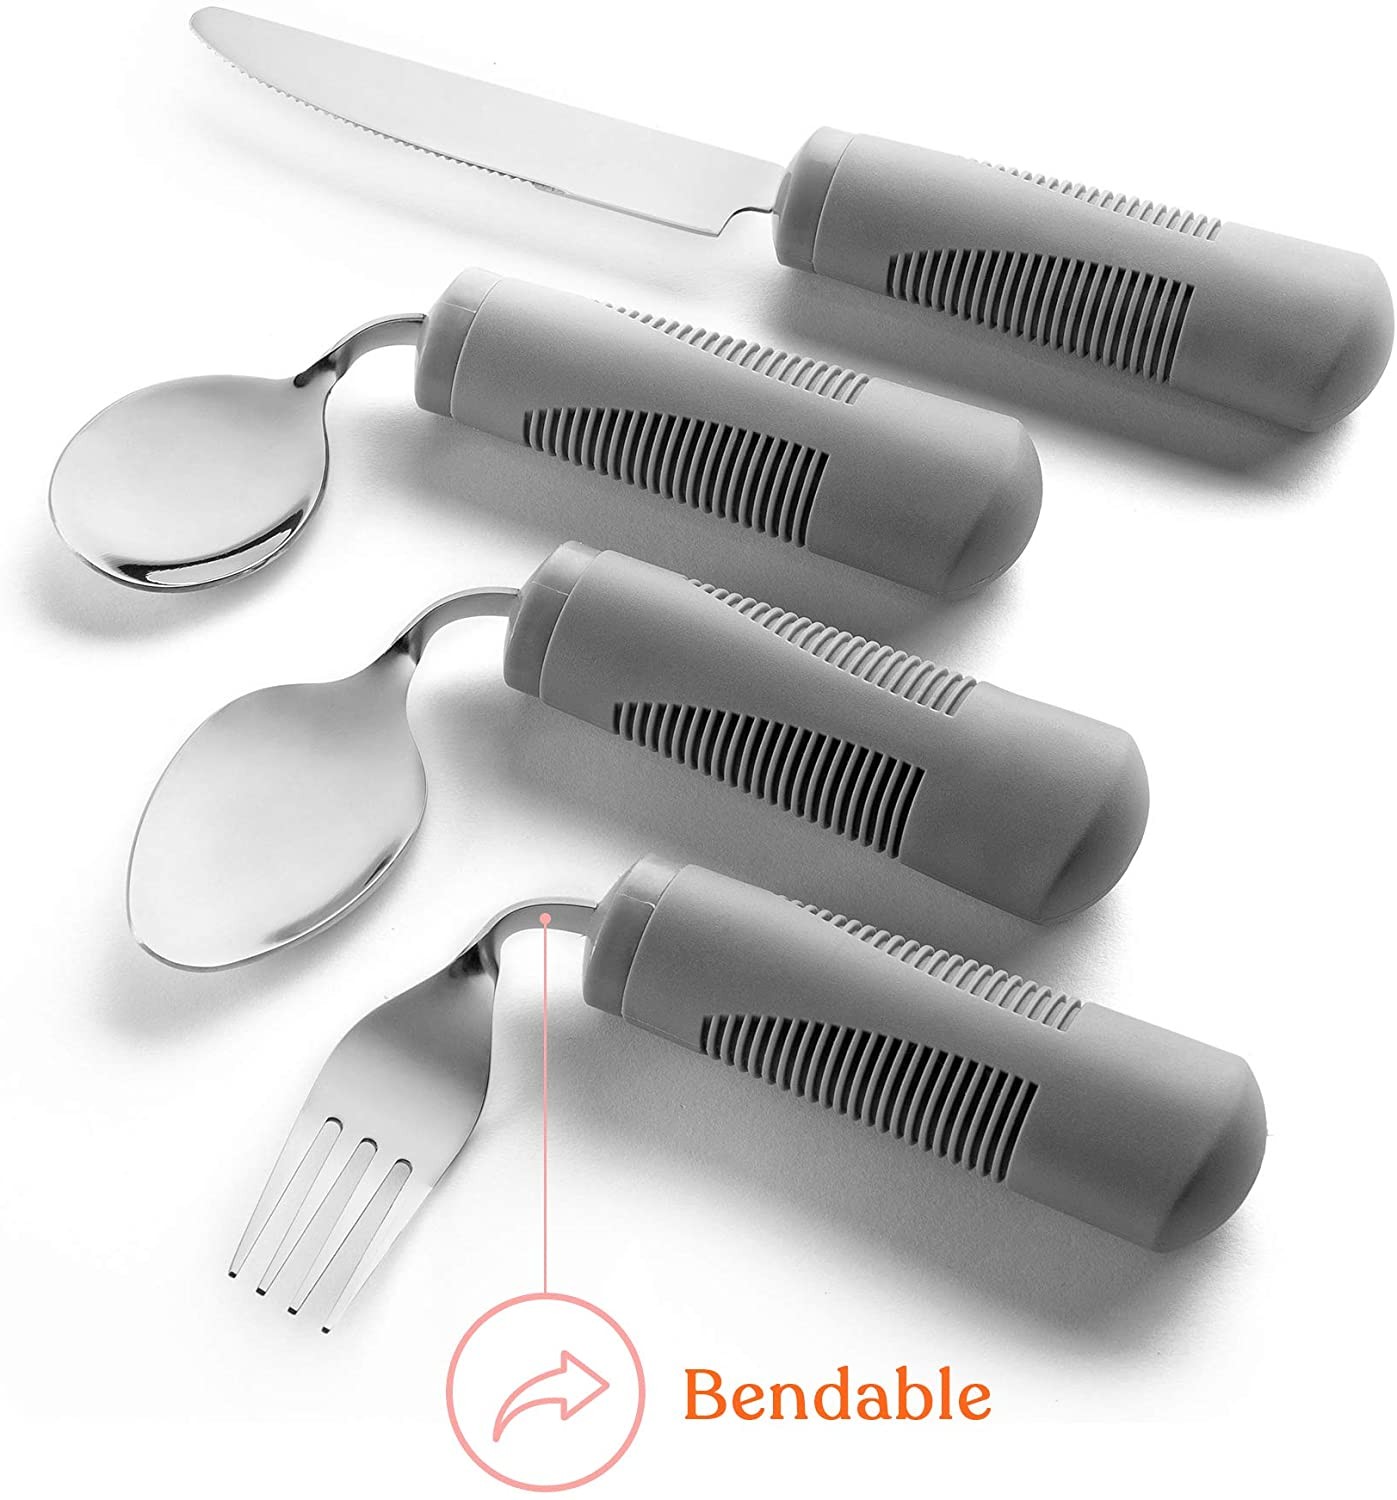 Special Supplies Adaptive Utensils (5-Piece Kitchen Set) Wide, Non-Weighted, Non-Slip Handles for Hand Tremors, Arthritis, Parkinsons or Elderly Use